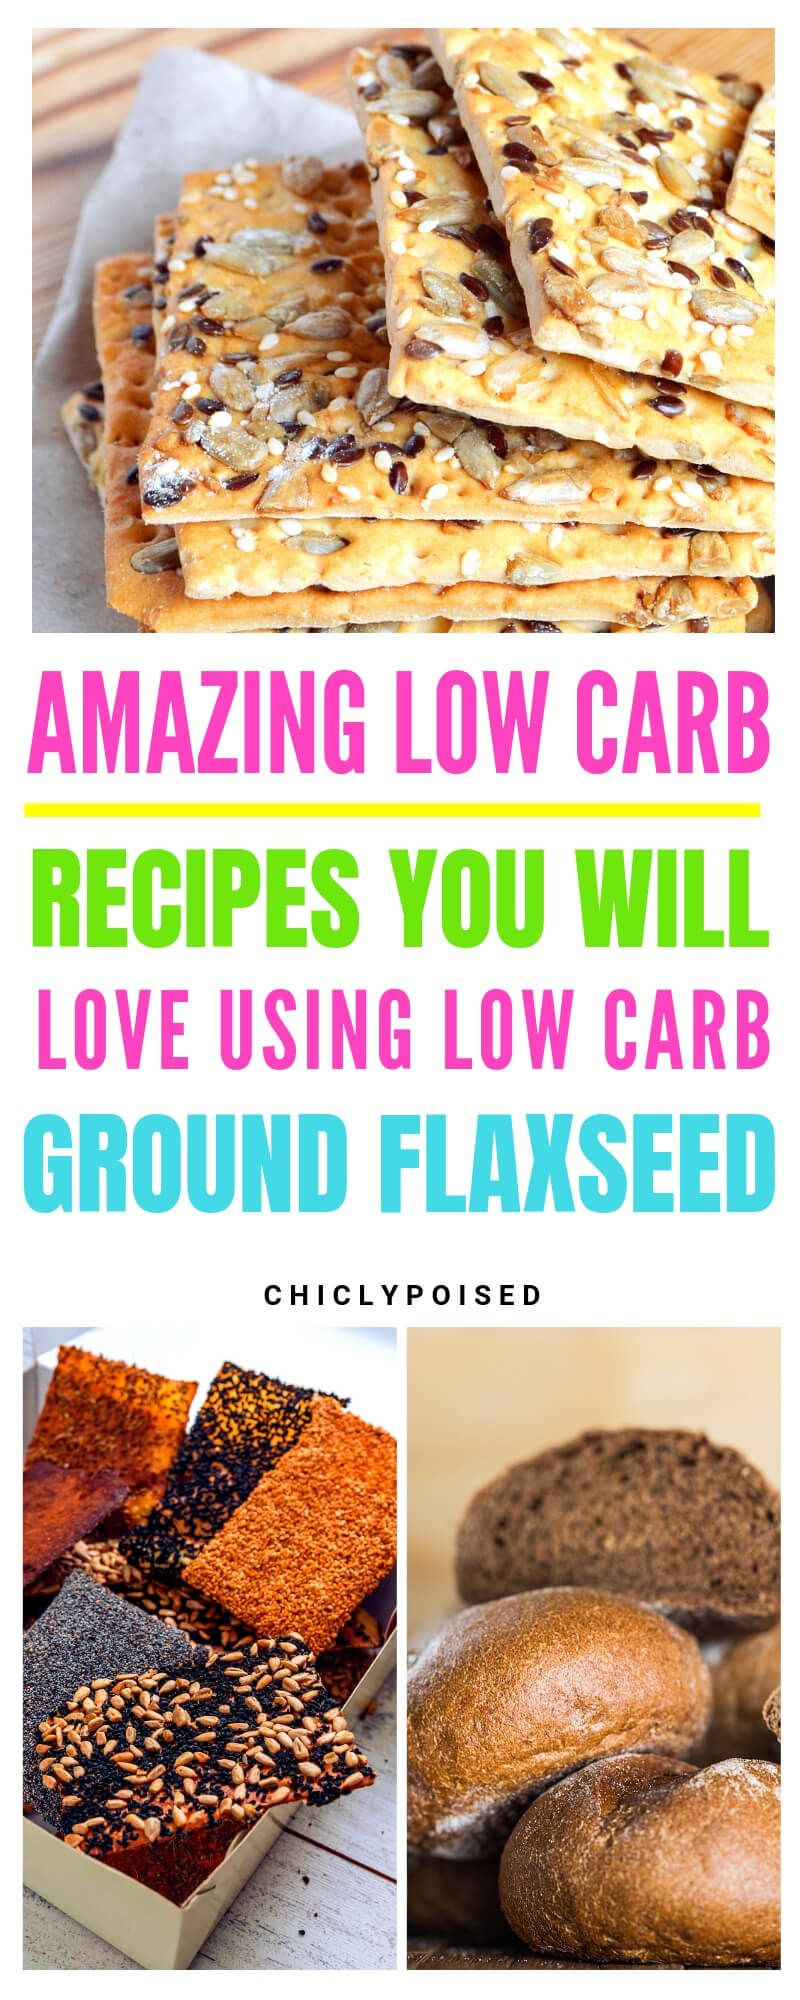 Low Carb Flax Seed Recipes
 Low Carb Keto Ground Flaxseed Flour Recipes